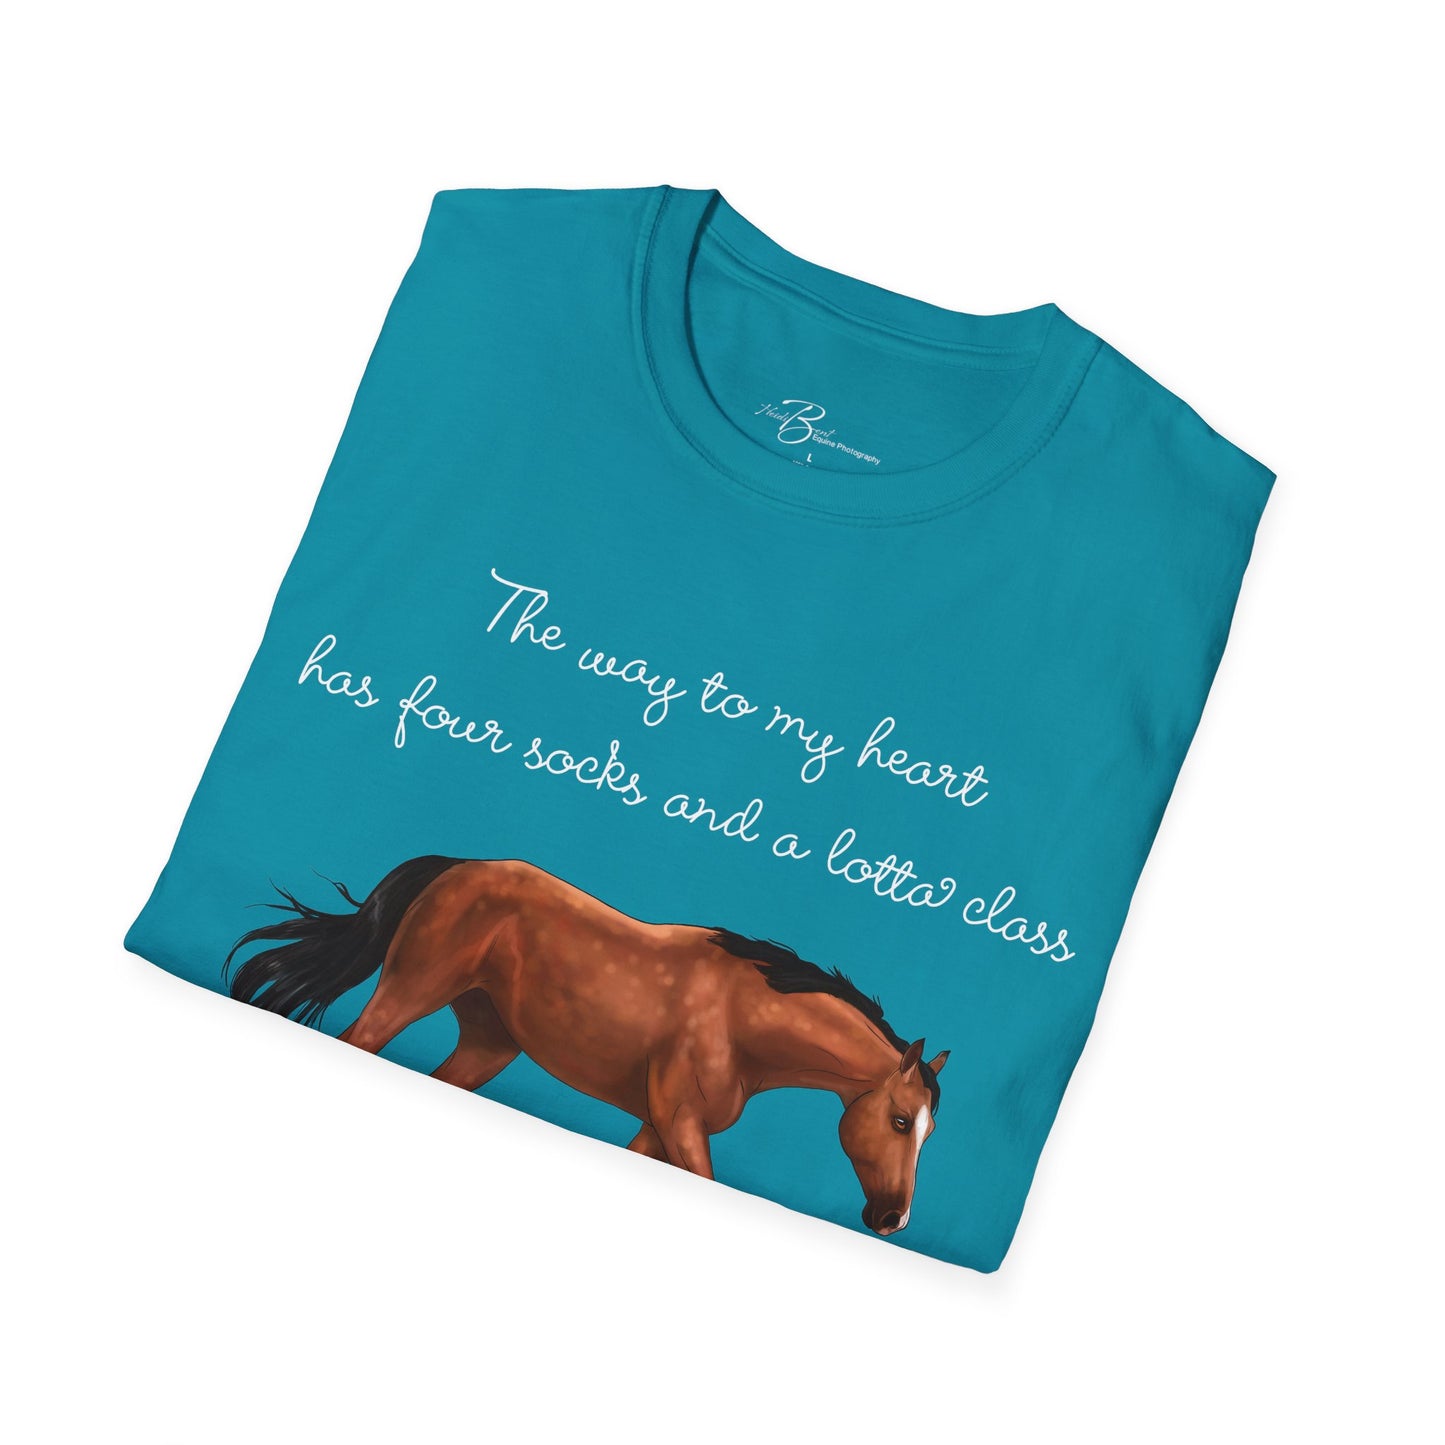 The Way To My Heart - Bay - Horse Lover T-Shirt - Color Specific